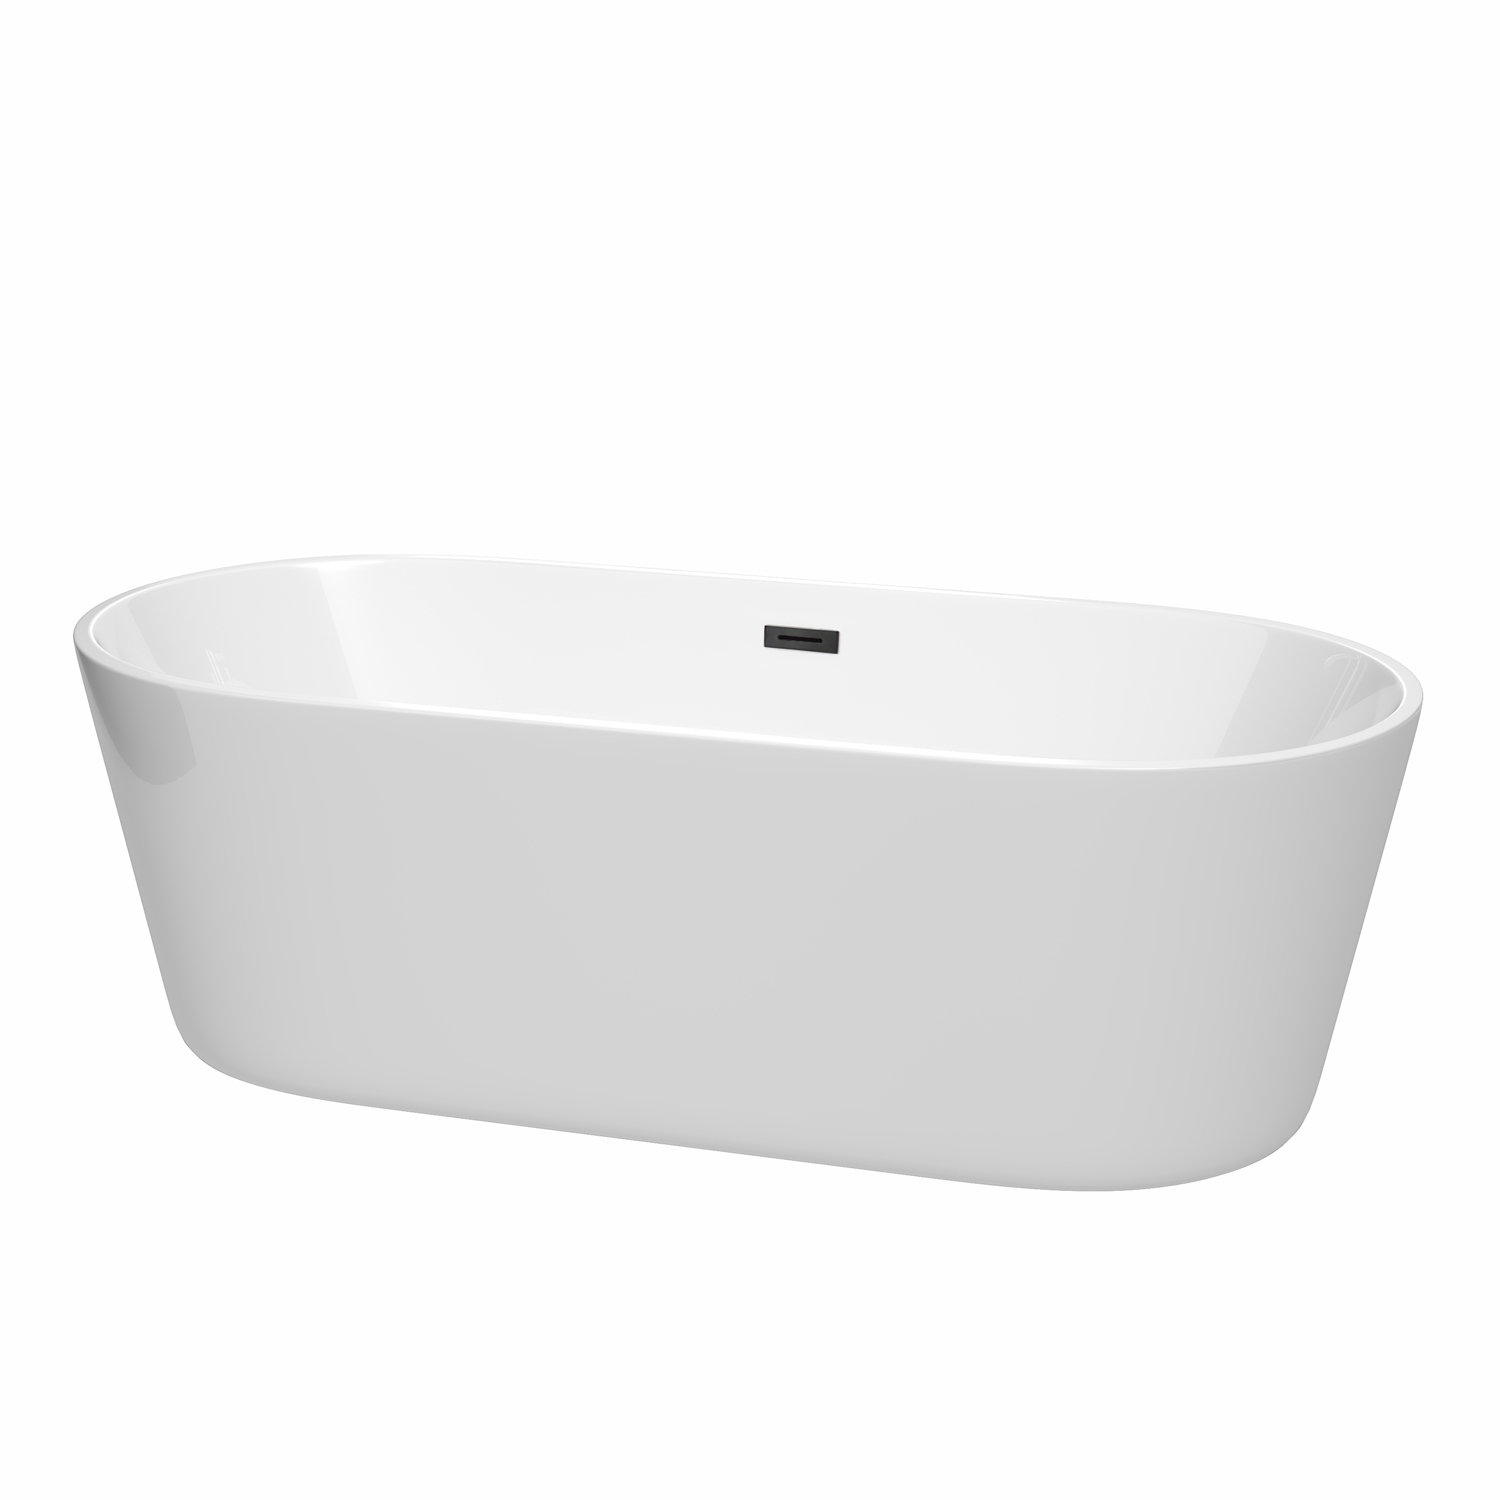 71" Freestanding Bathtub in White with Matte Black Drain and Overflow Trim Finish